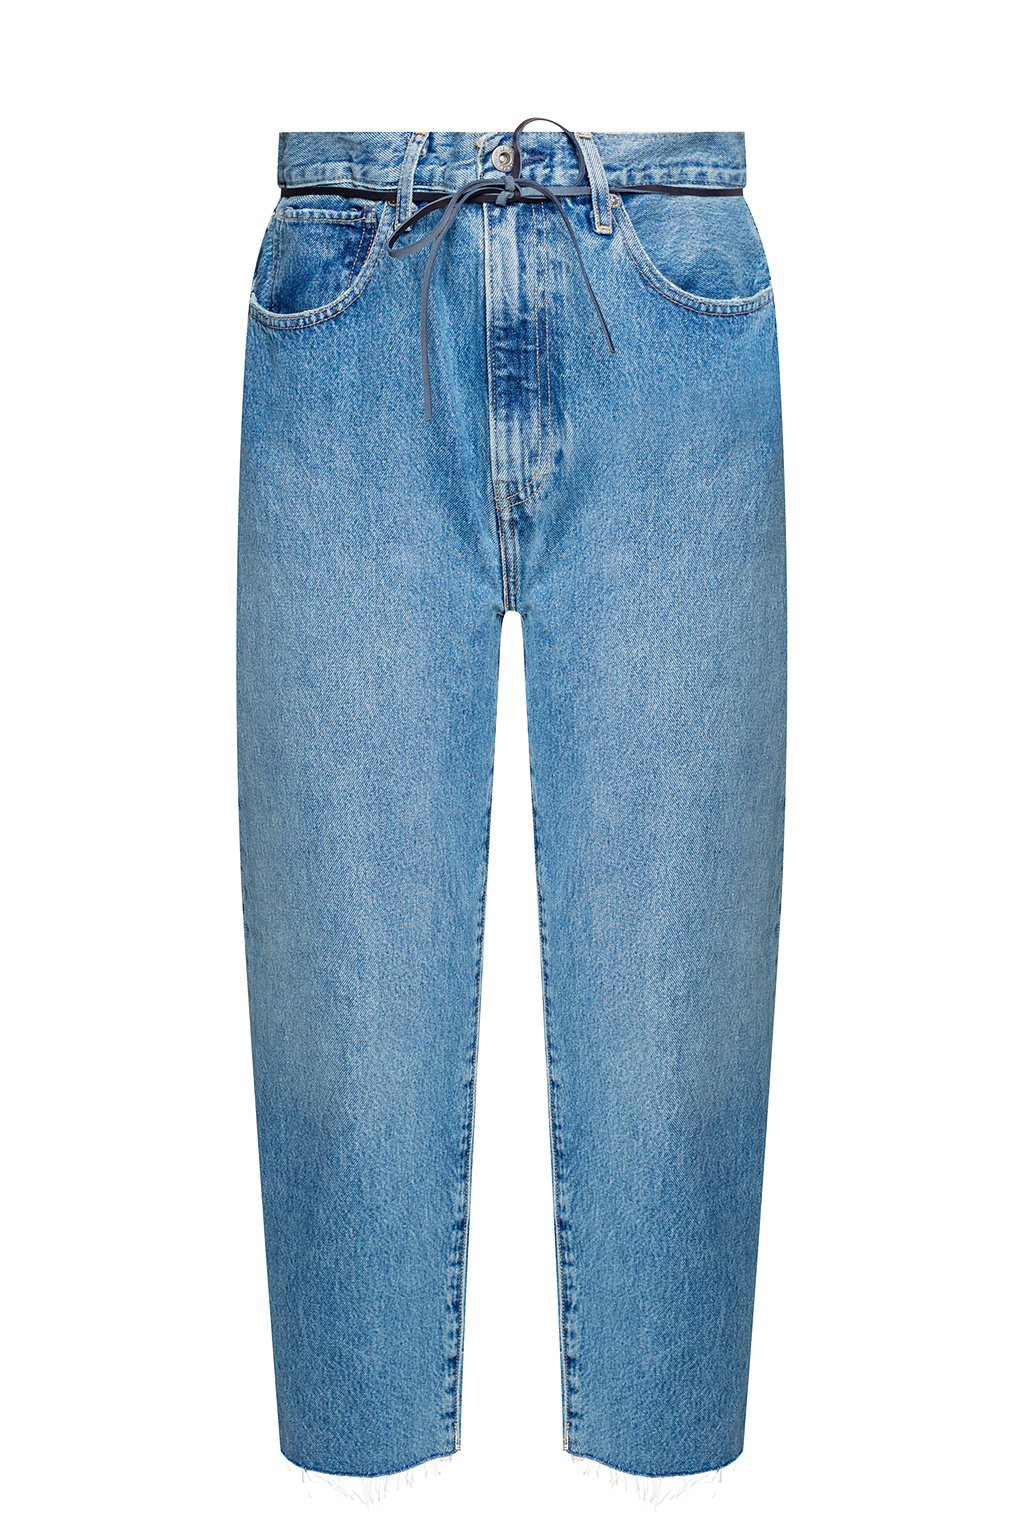 Blue Jeans 'Made & Crafted ®' collection Levi's - Vitkac Ukraine